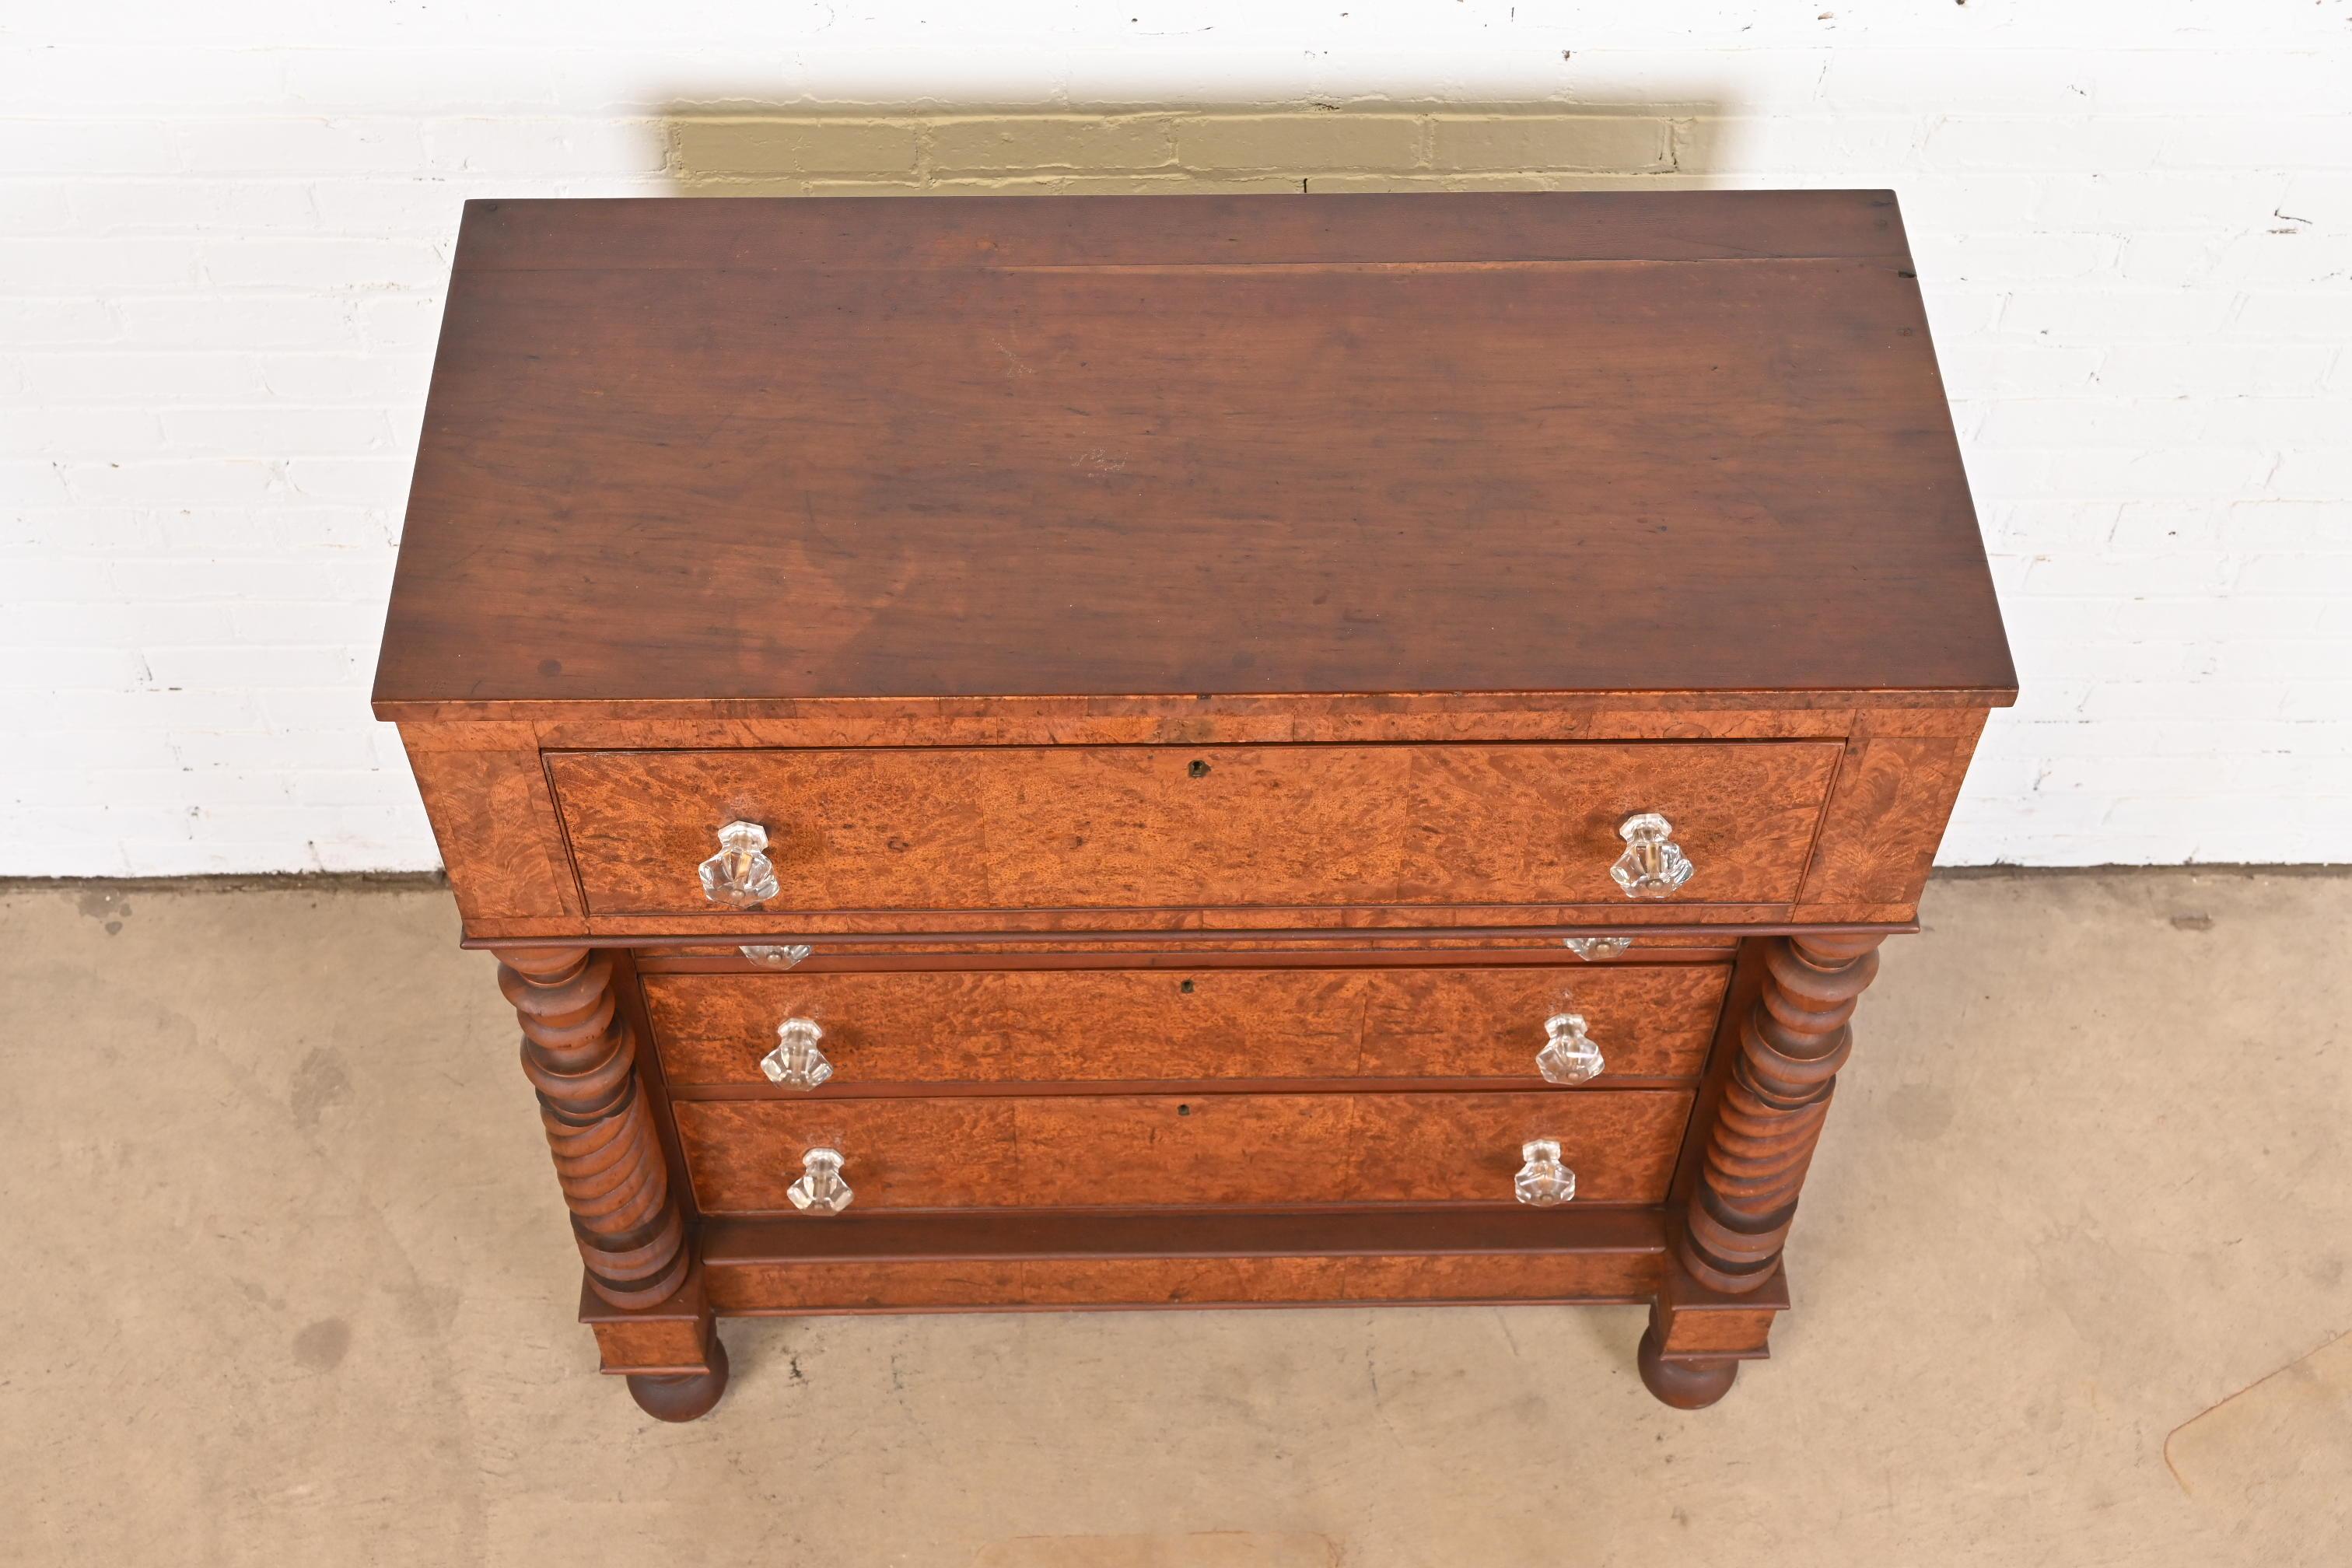 Antique American Empire Burled Mahogany Chest of Drawers, Circa 1820s For Sale 7